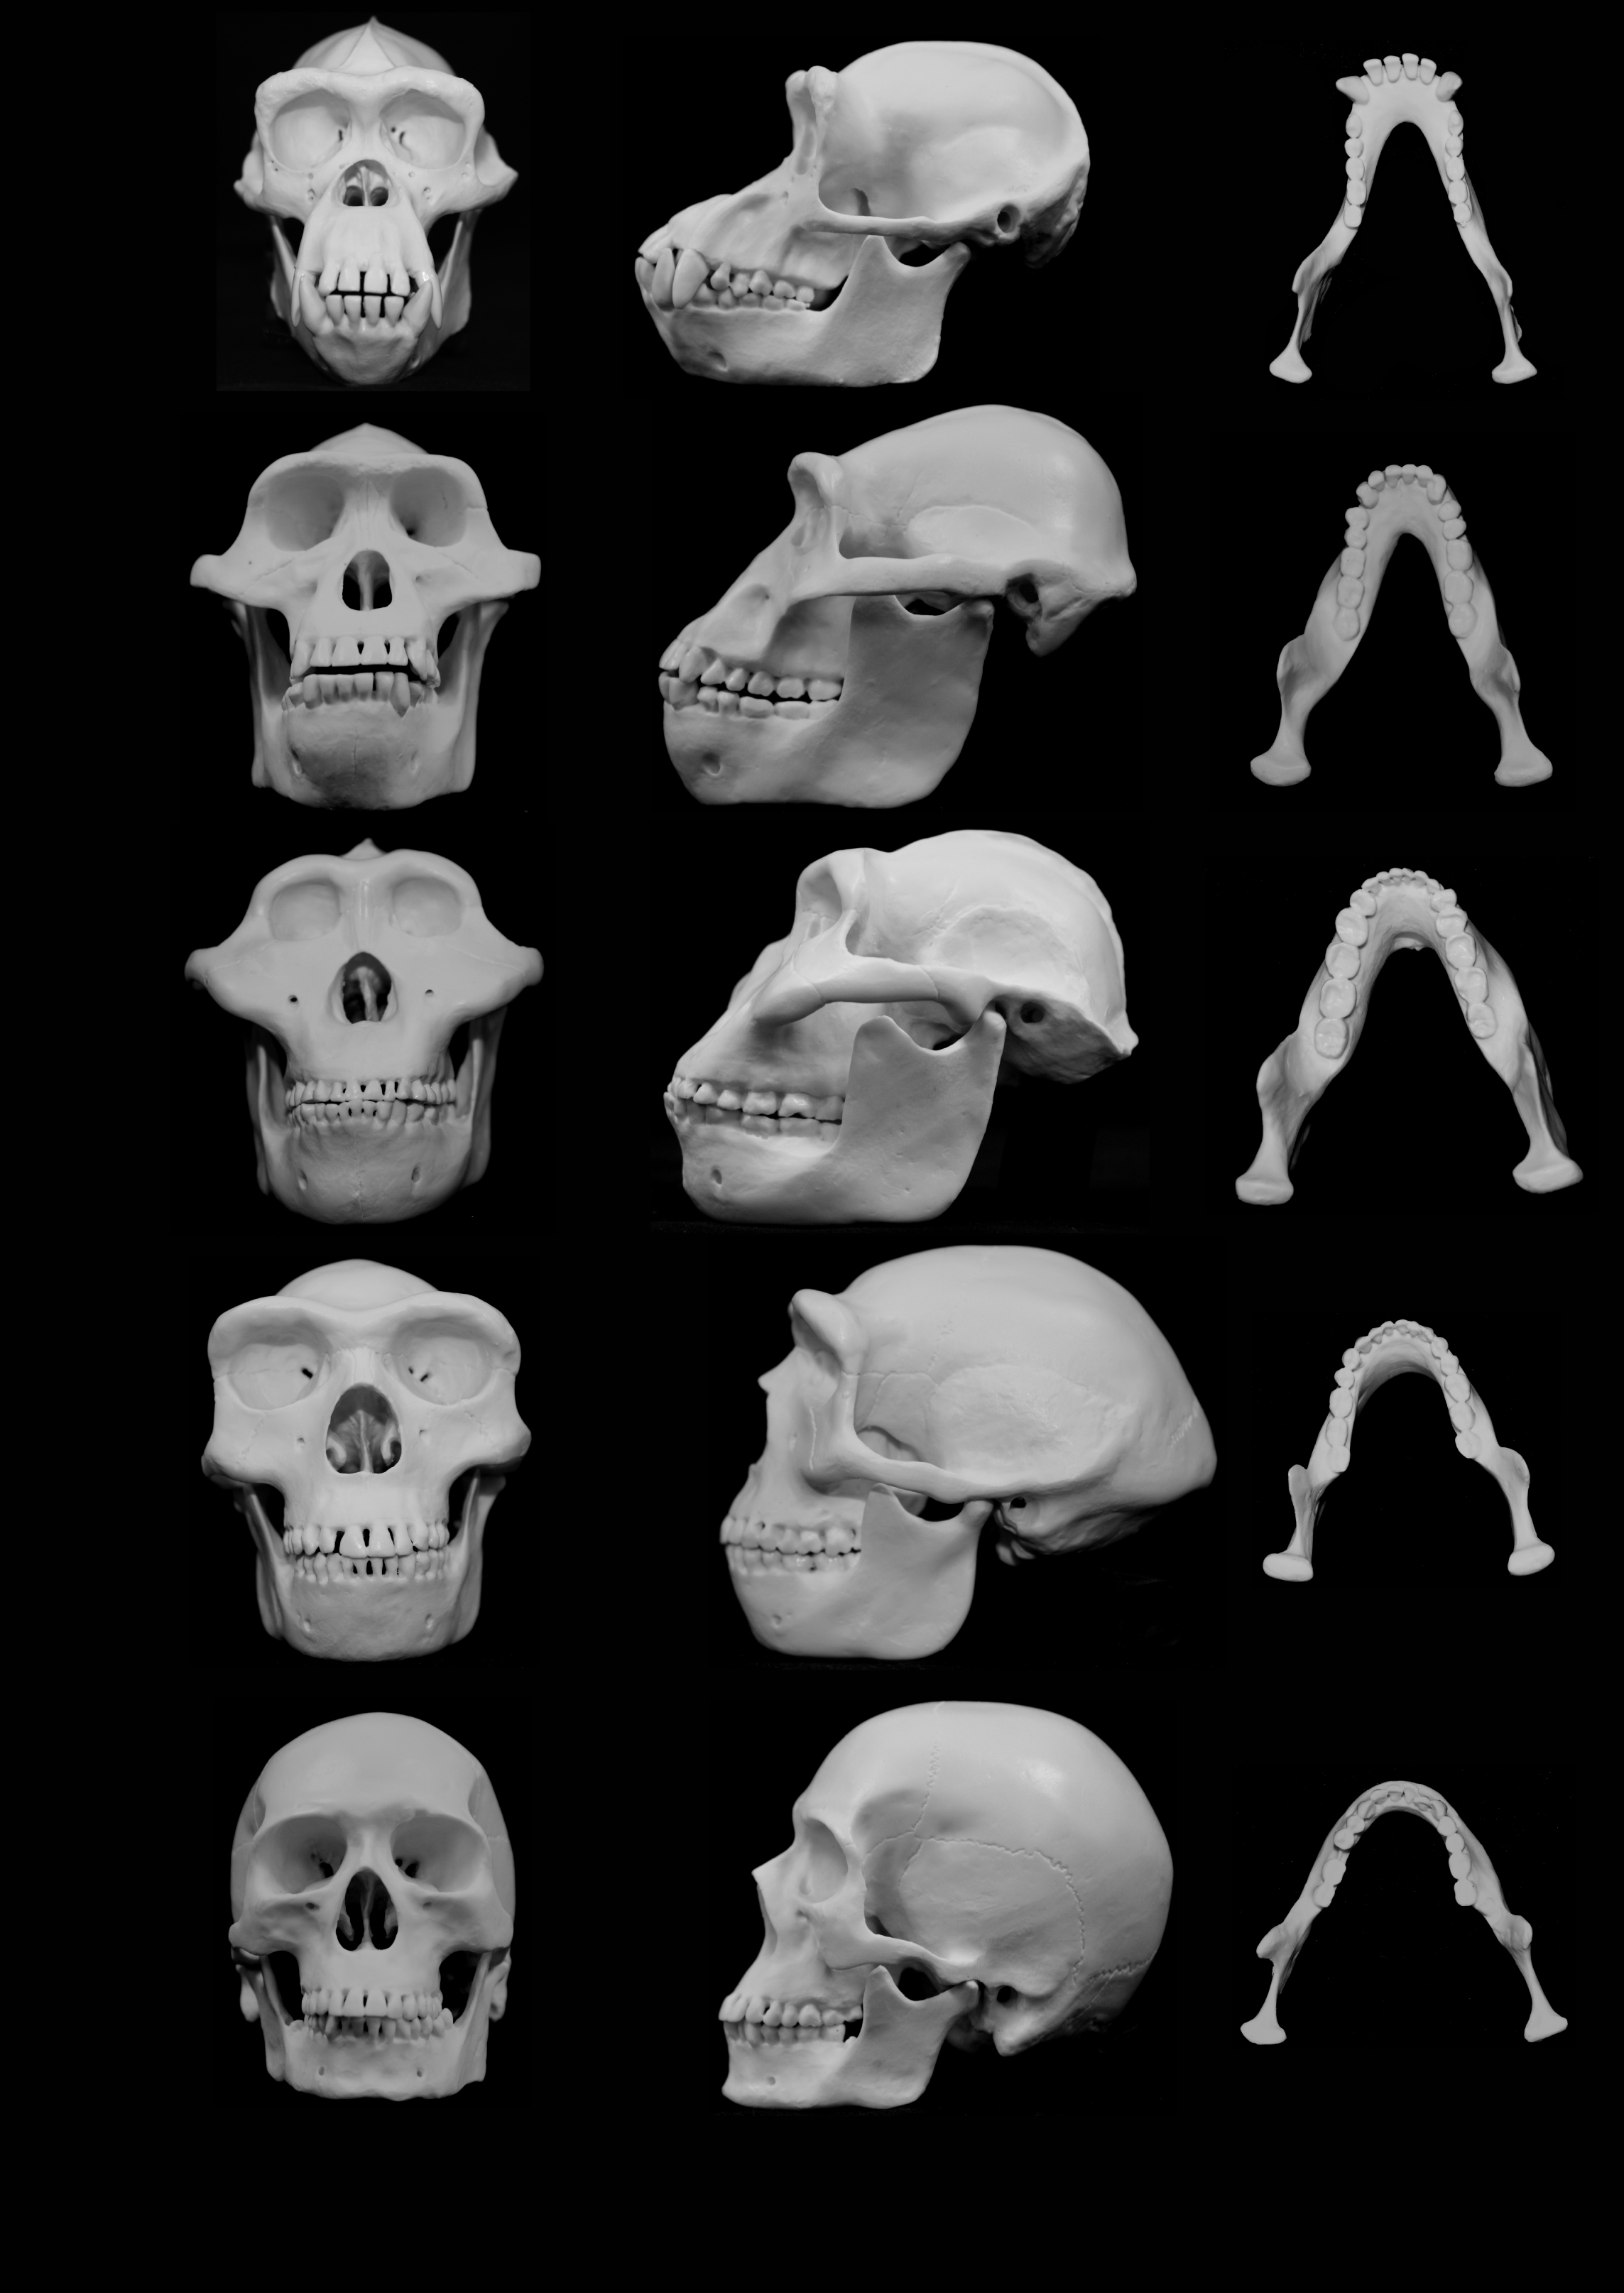 University of Utah (An artist's impression of how human faces may have evolved to minimise injury from punches.)